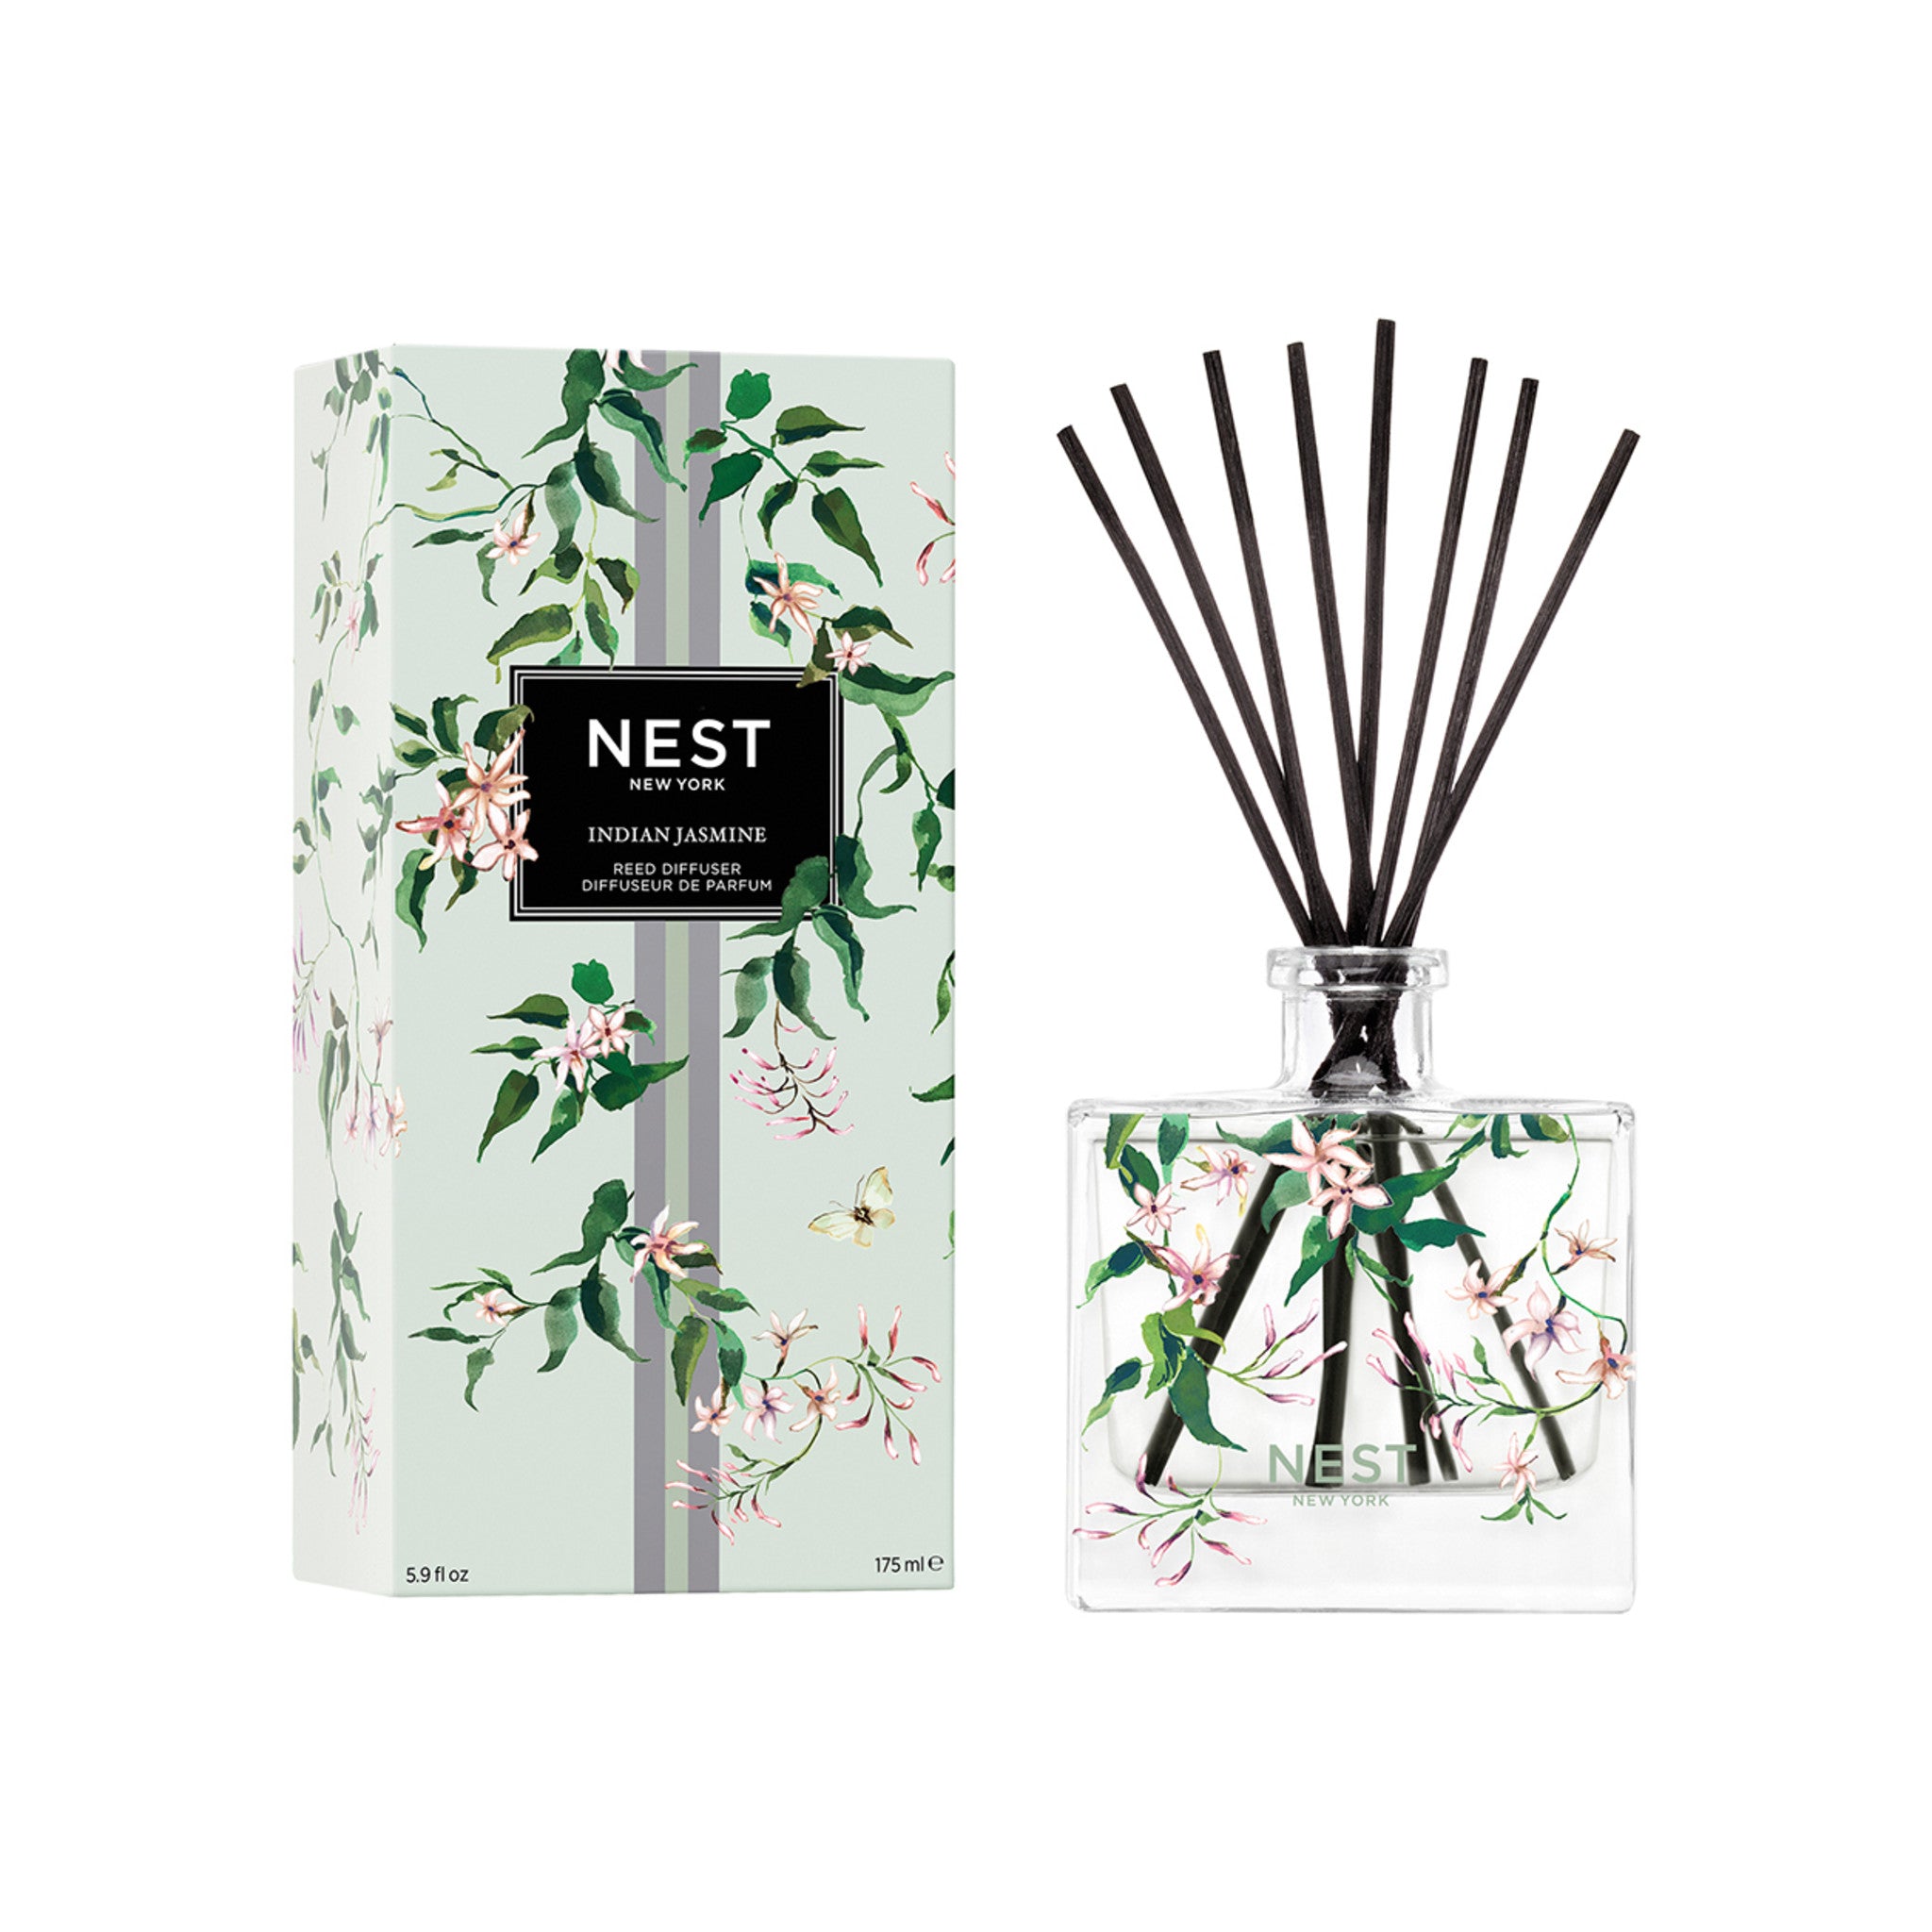 Nest Indian Jasmine Specialty Diffuser main image.